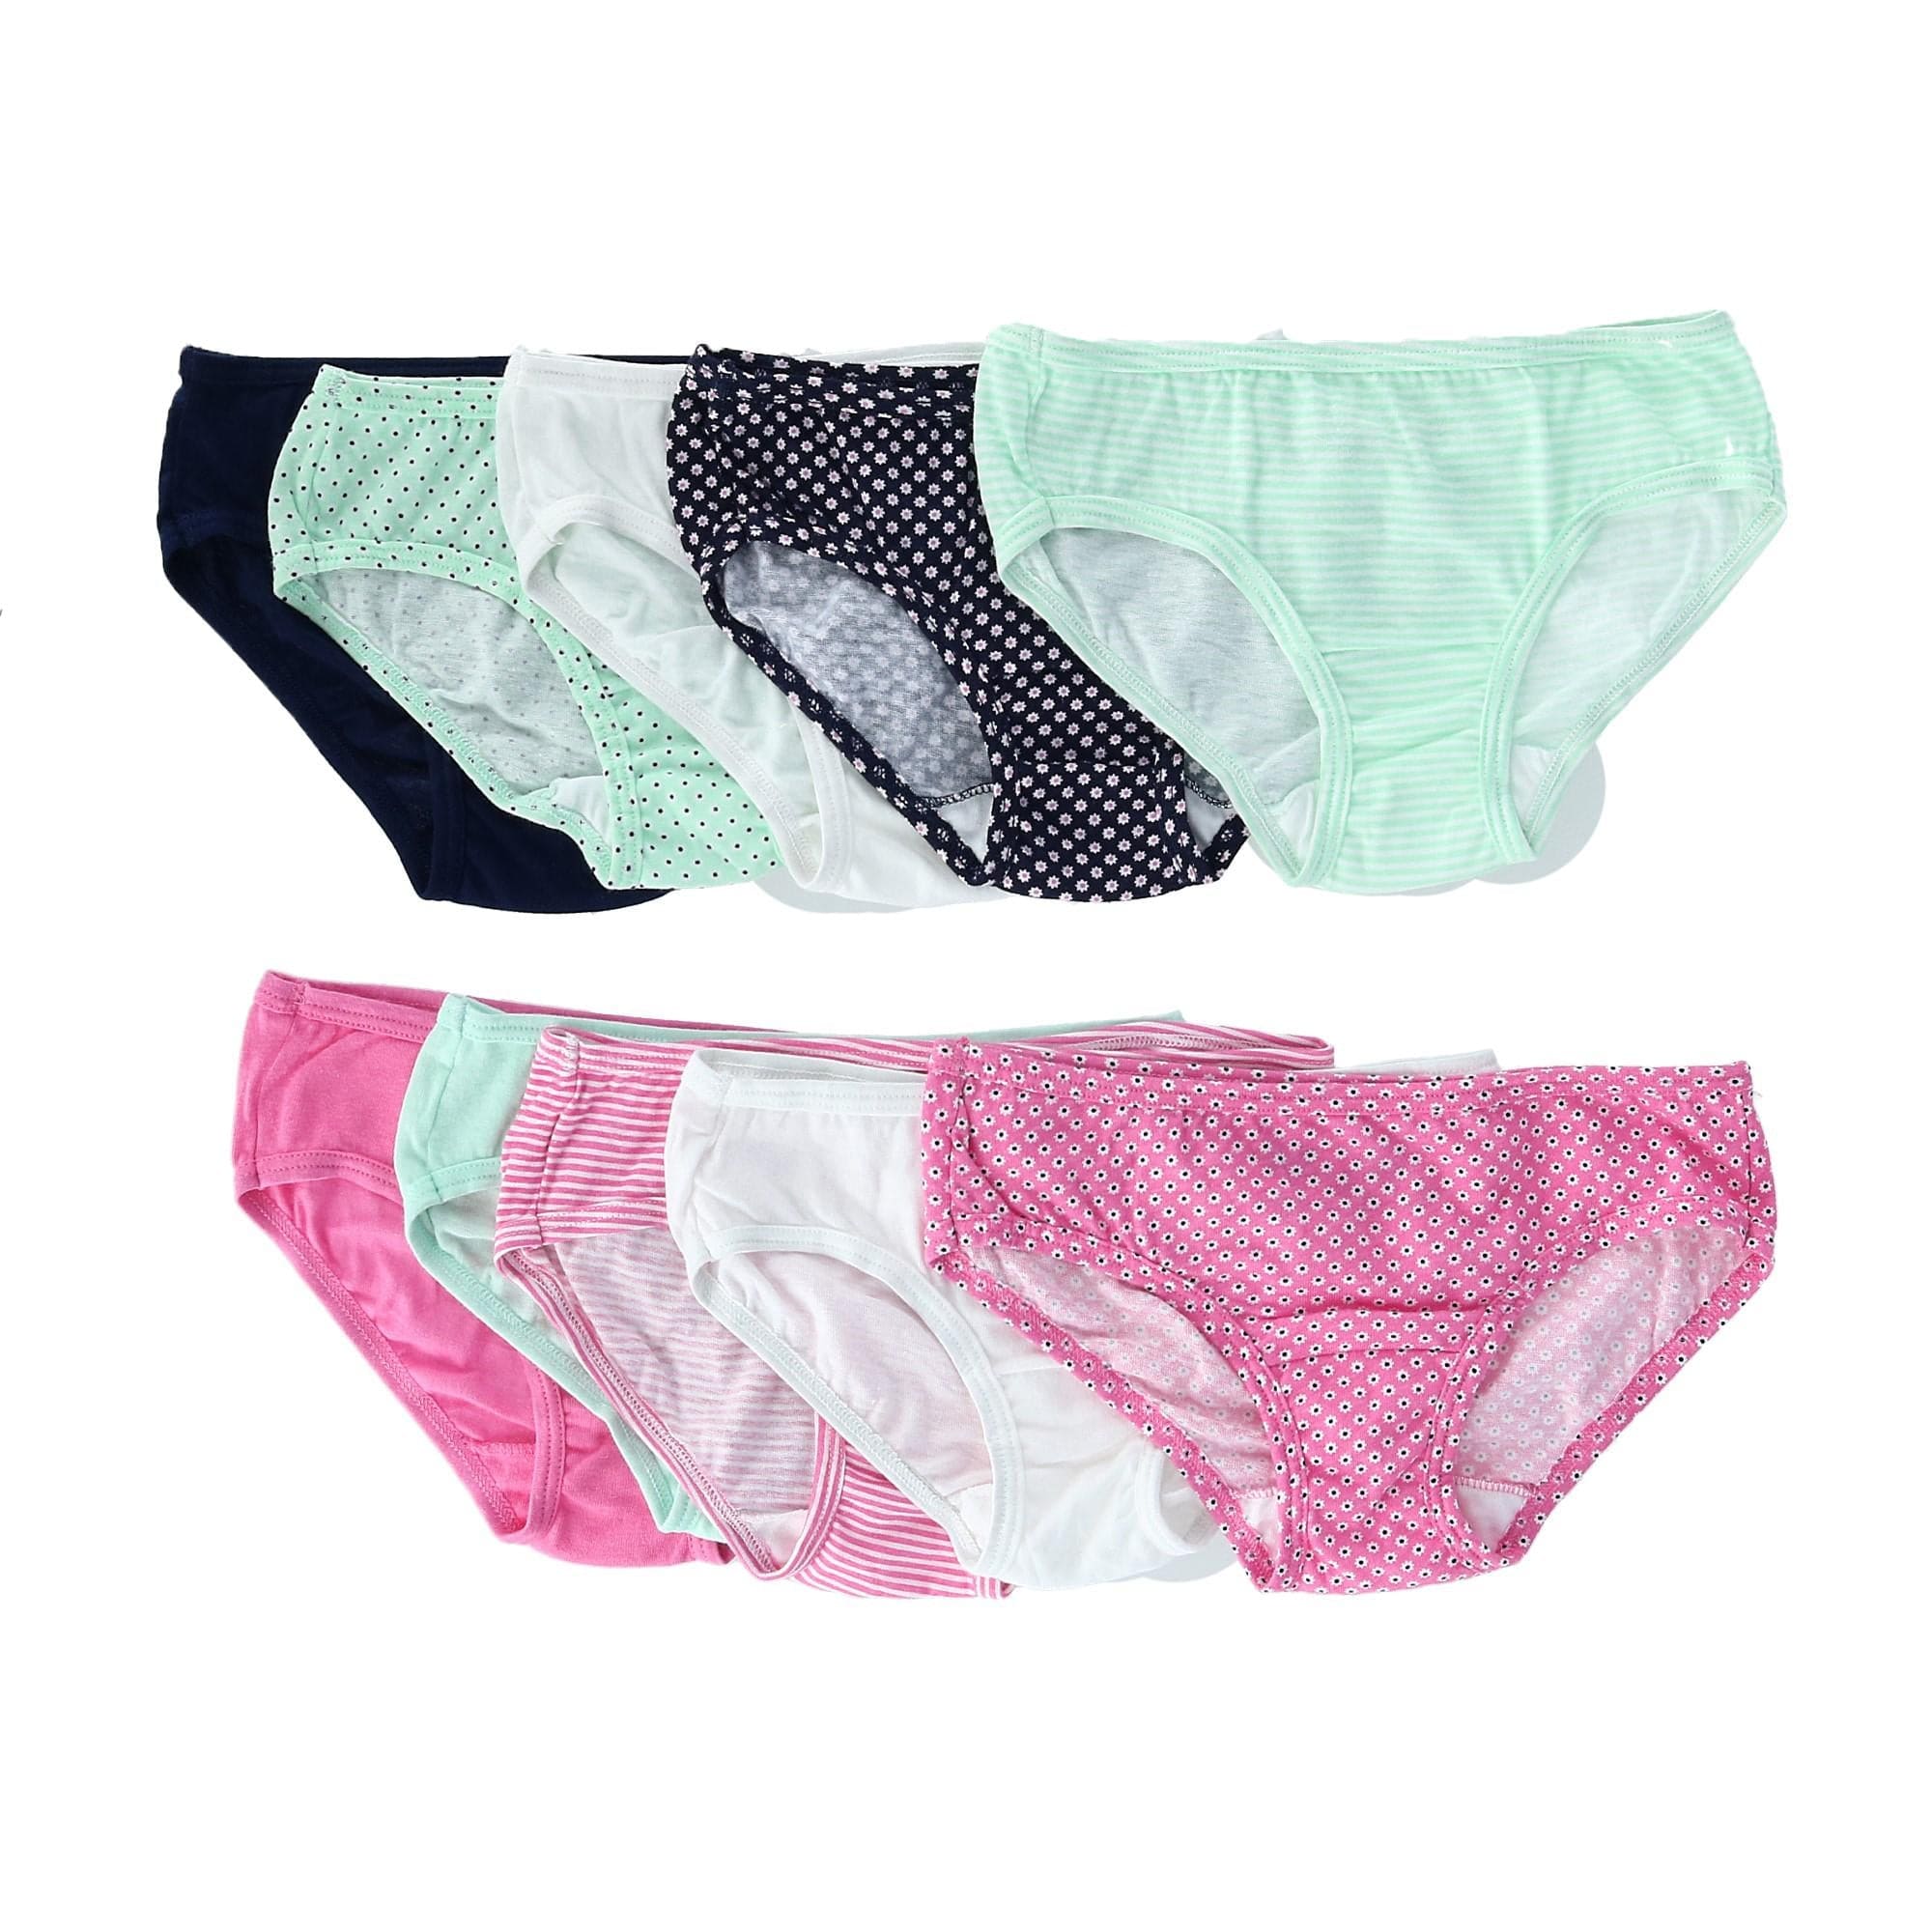 288 Wholesale Girls Fruit Of The Loom Hipster Underwear Briefs And